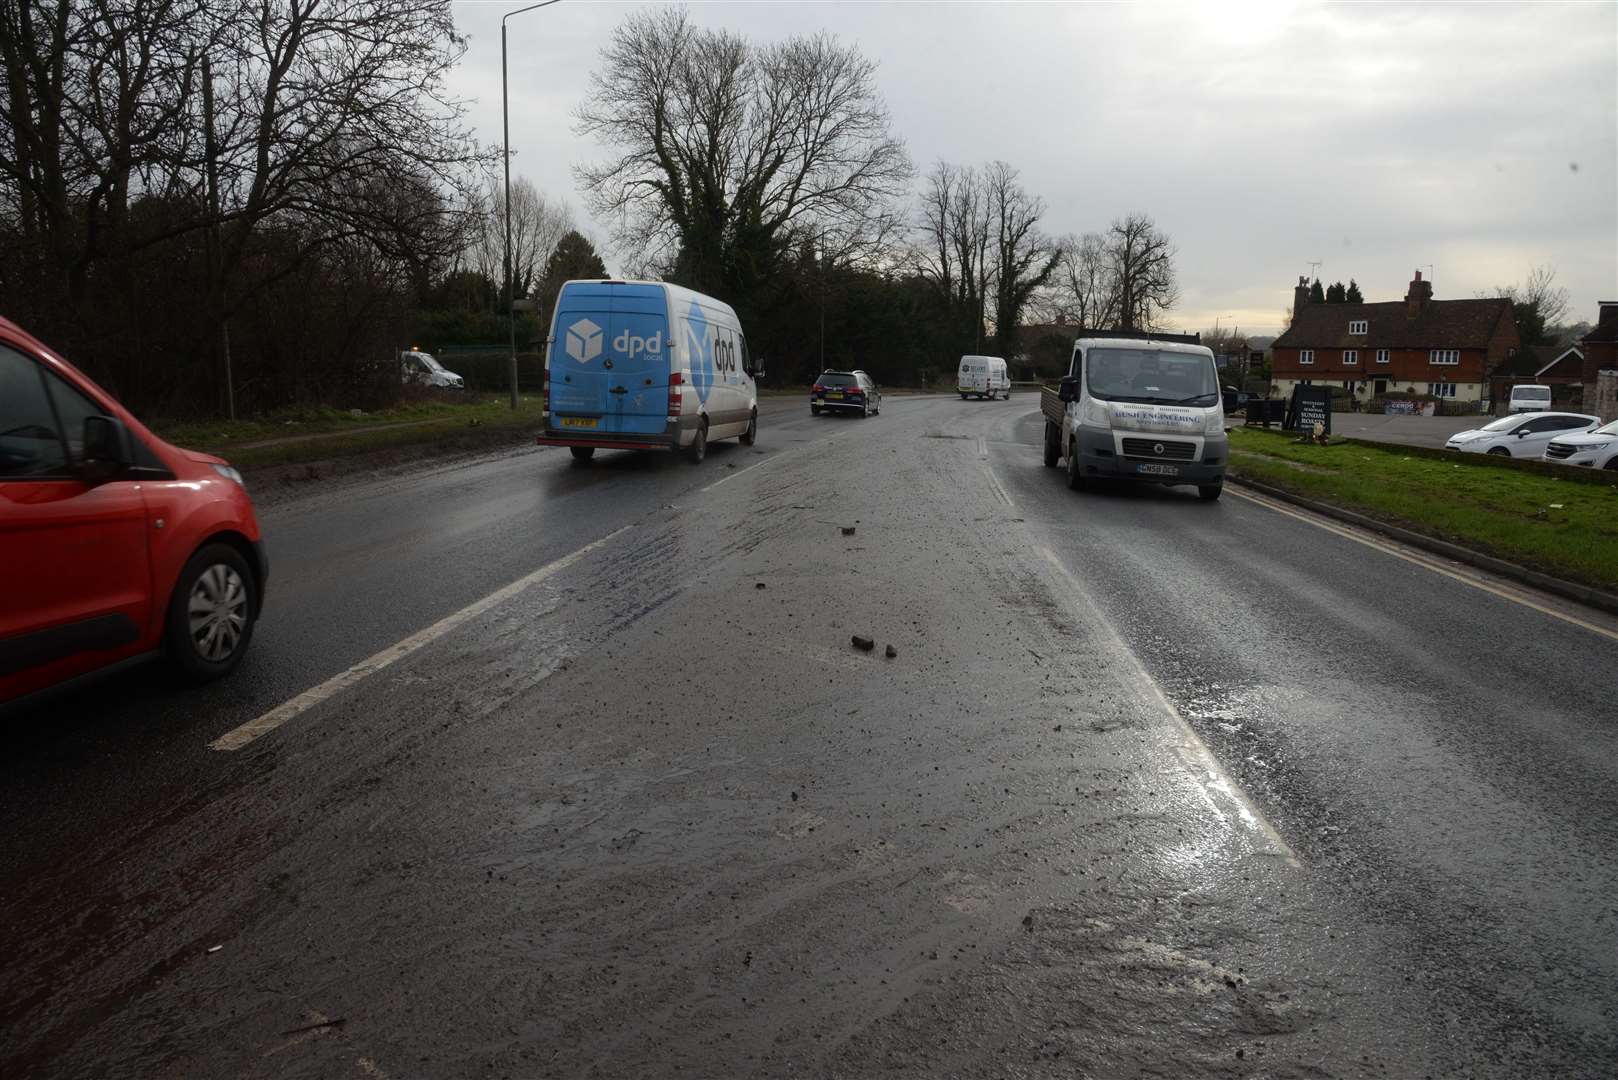 The mud covered London Road at Wrotham near the Invicta Business Park